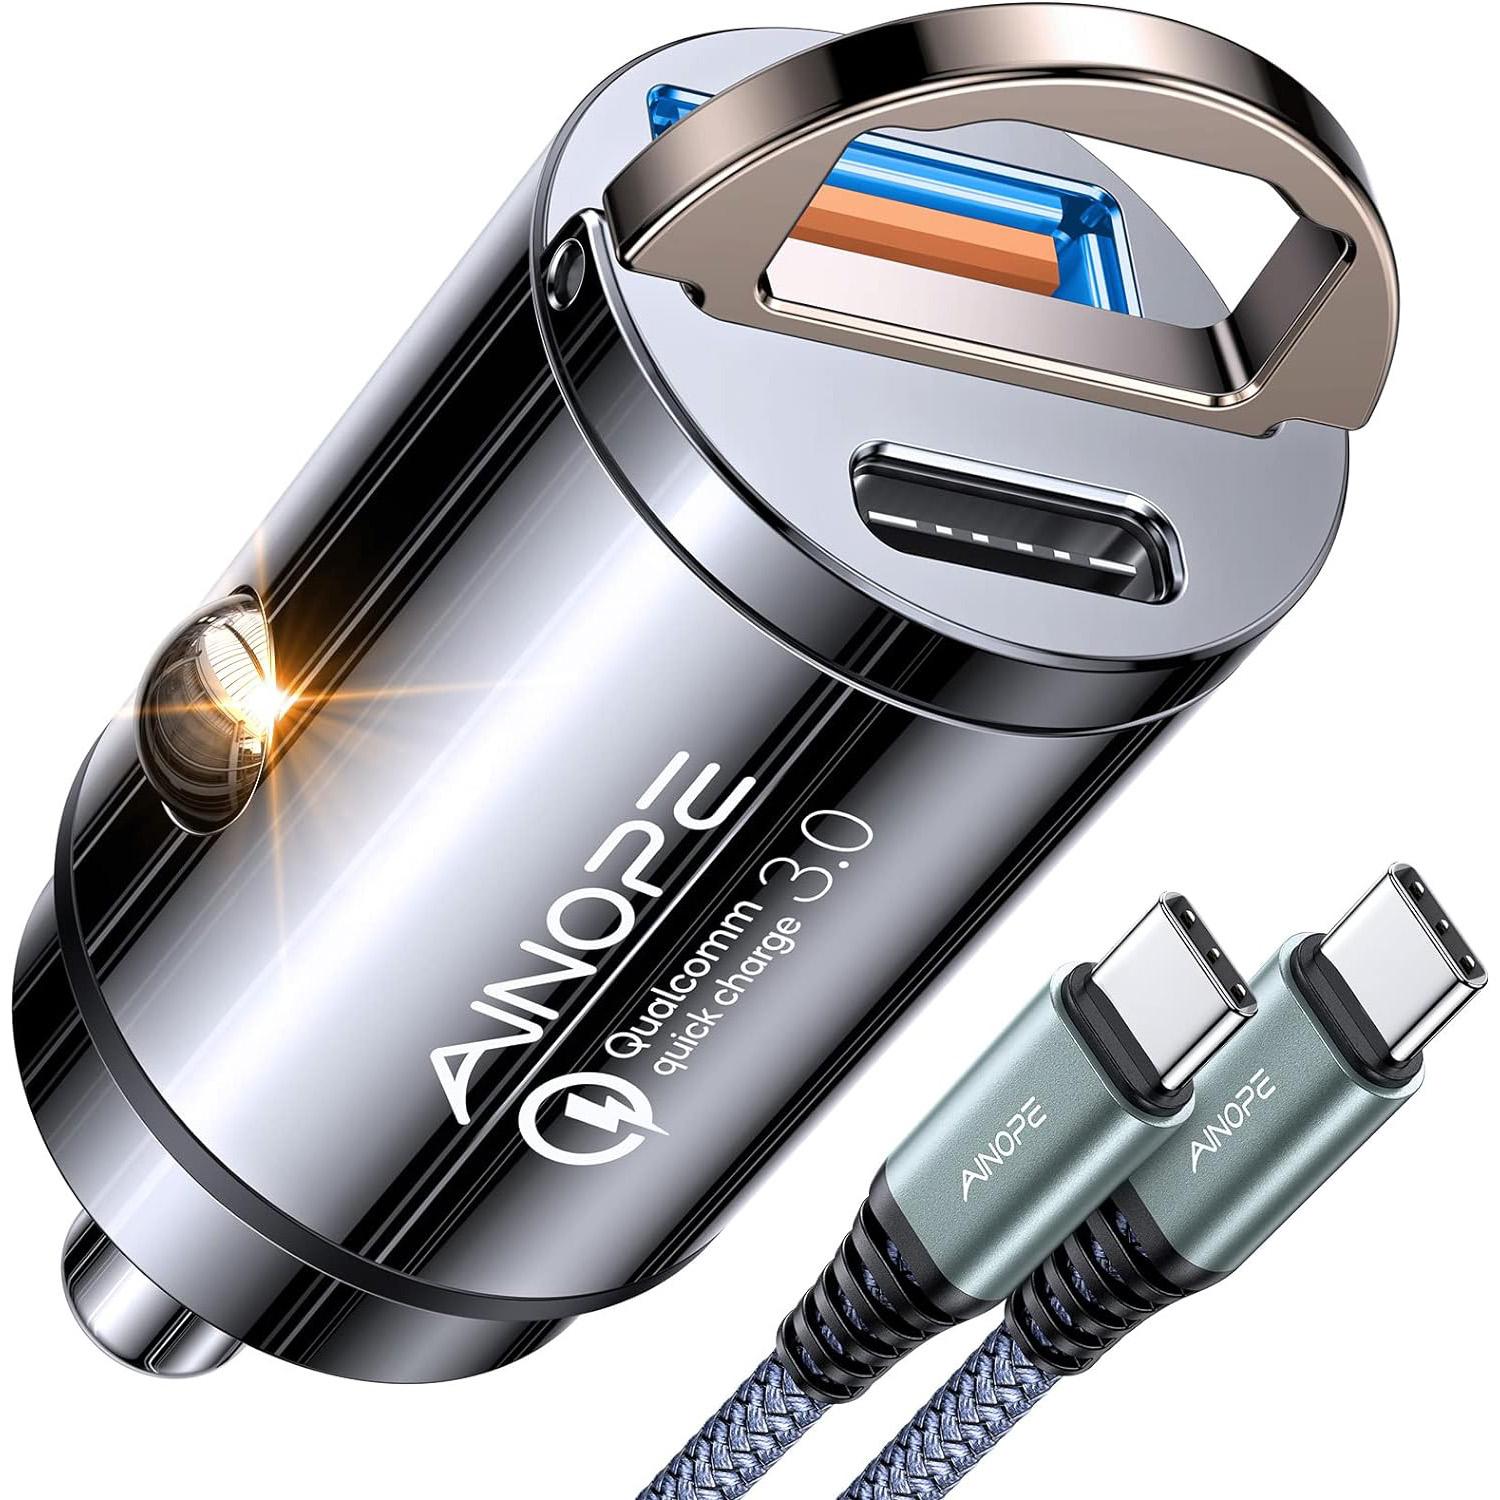 Ainope 90W USB and USB-C Car Charger for $8.95